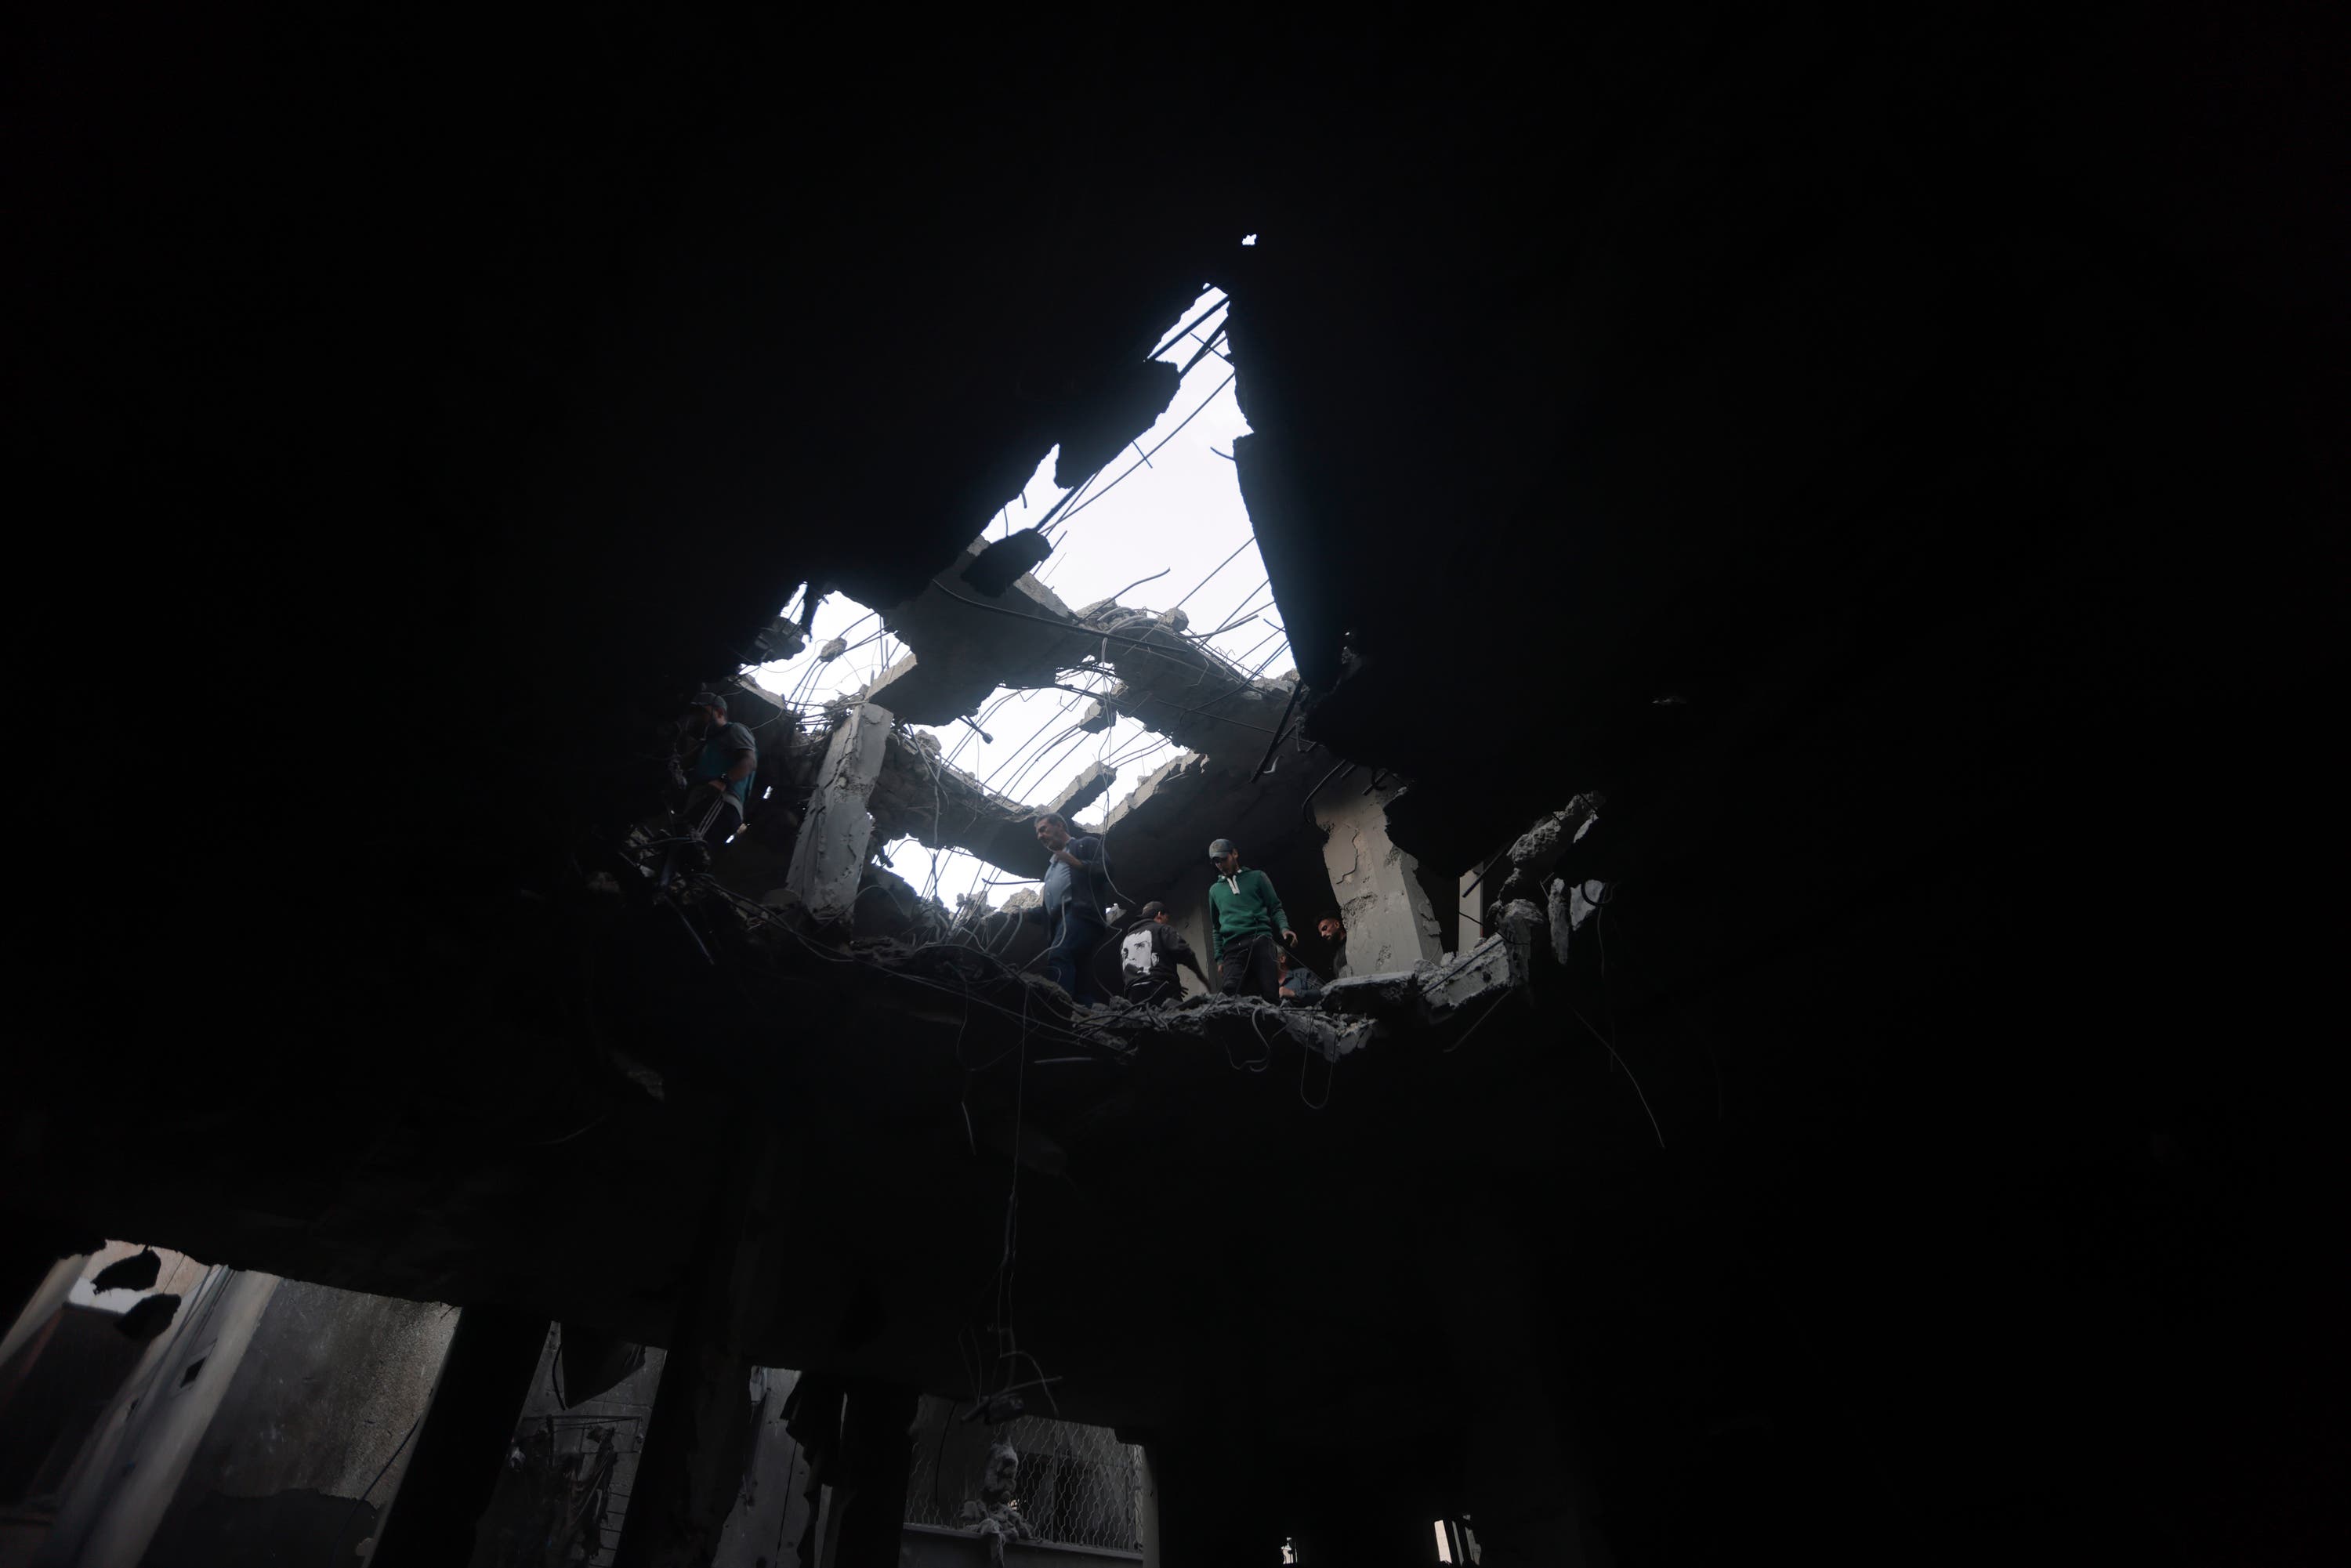 Palestinians look for survivors inside the remains of a destroyed building following an Israeli airstrike in Khan Younis refugee camp, southern Gaza Strip, on Saturday.